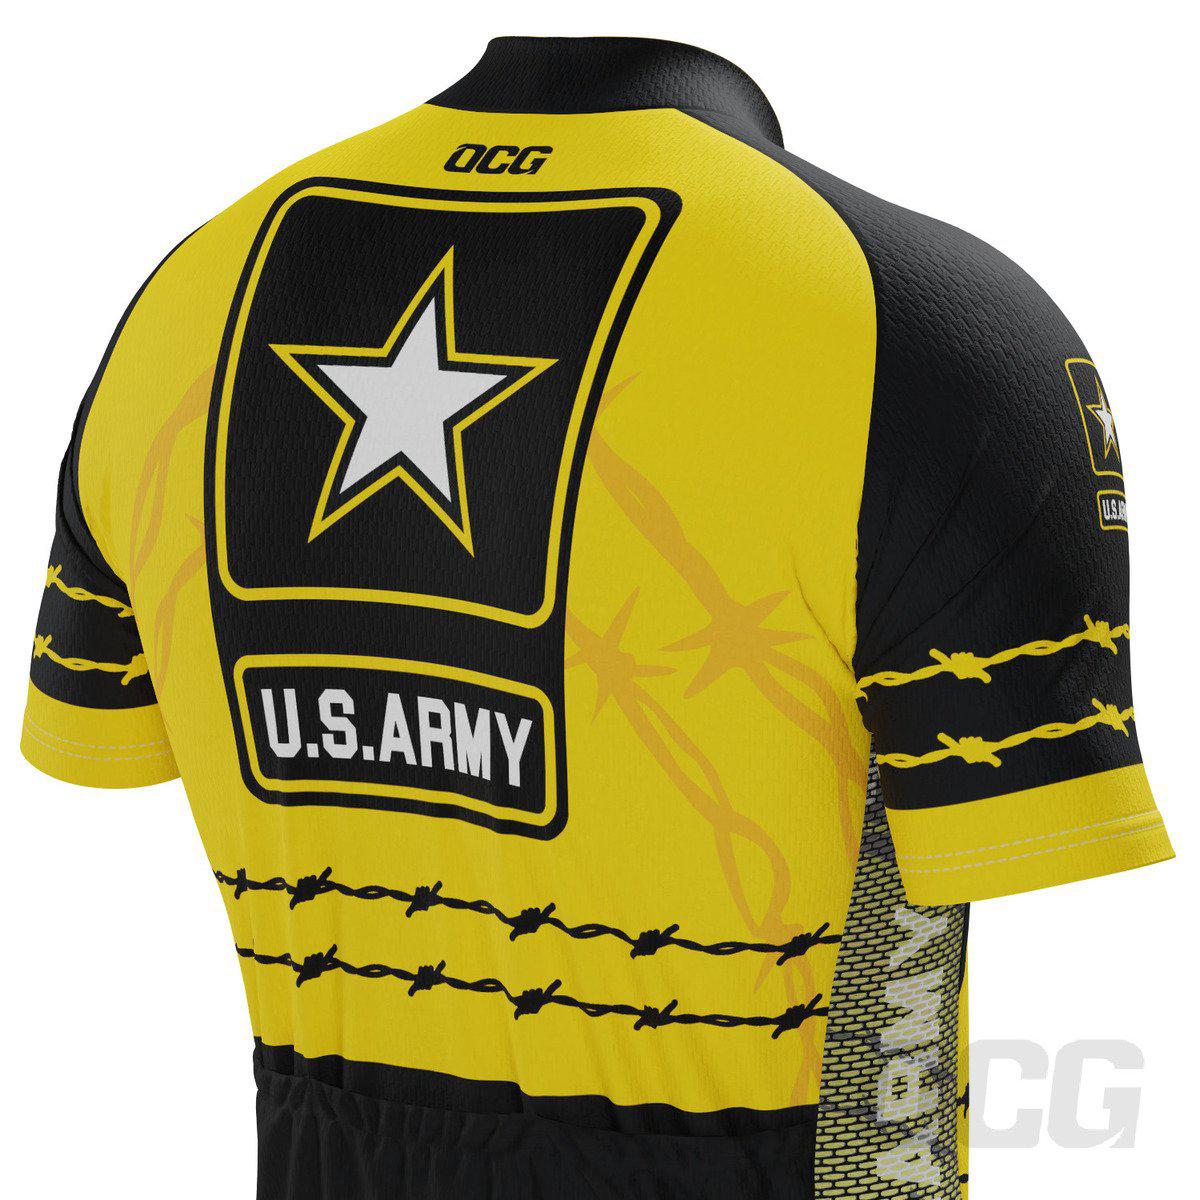 Men's USA Army Troops Pro-Band Short Sleeve Cycling Kit